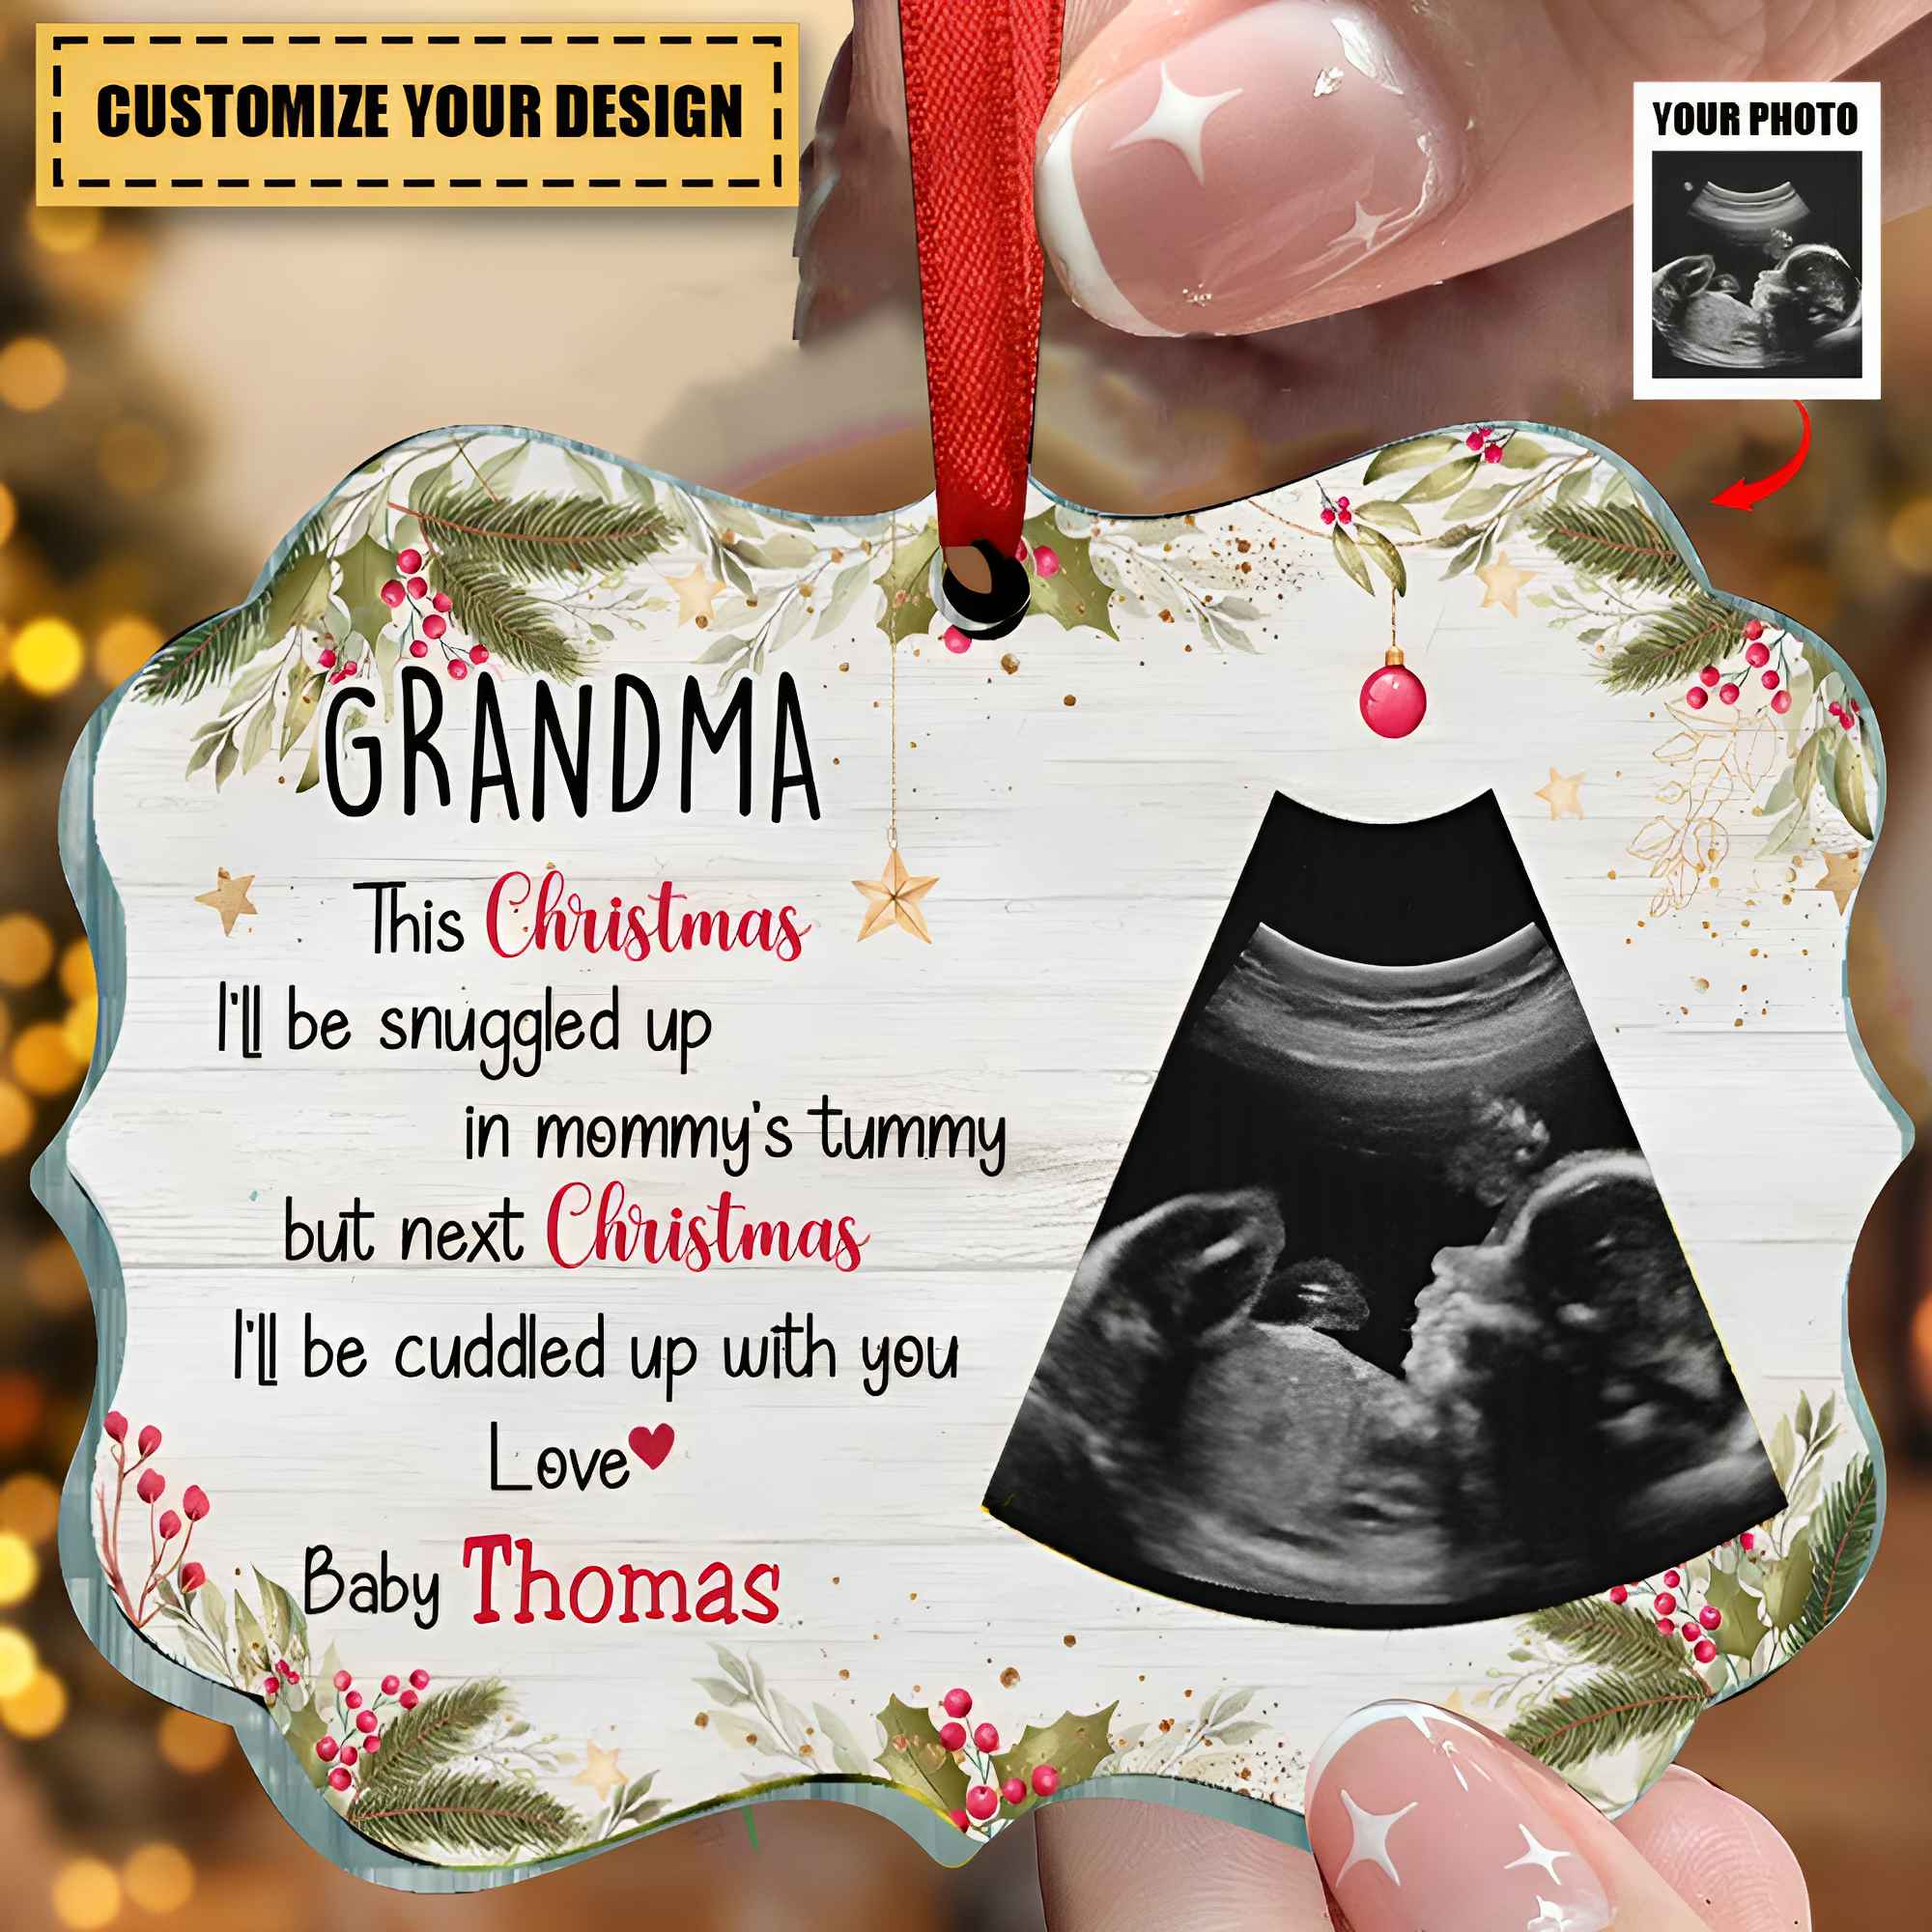 Family - This Christmas, I'll Be Snuggled Up In Mommy's Tummy - Personalized Transparent Ornament